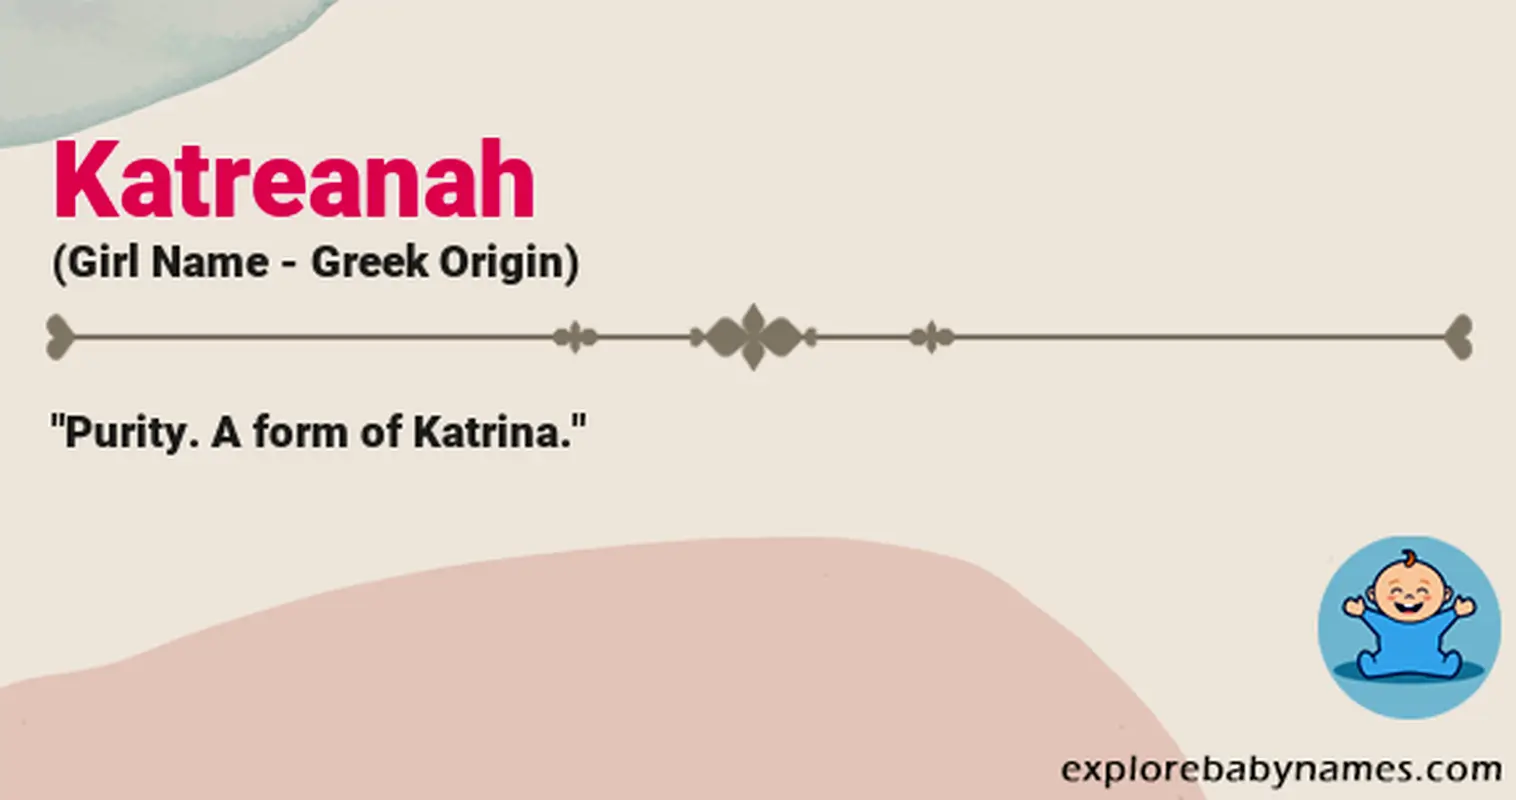 Meaning of Katreanah